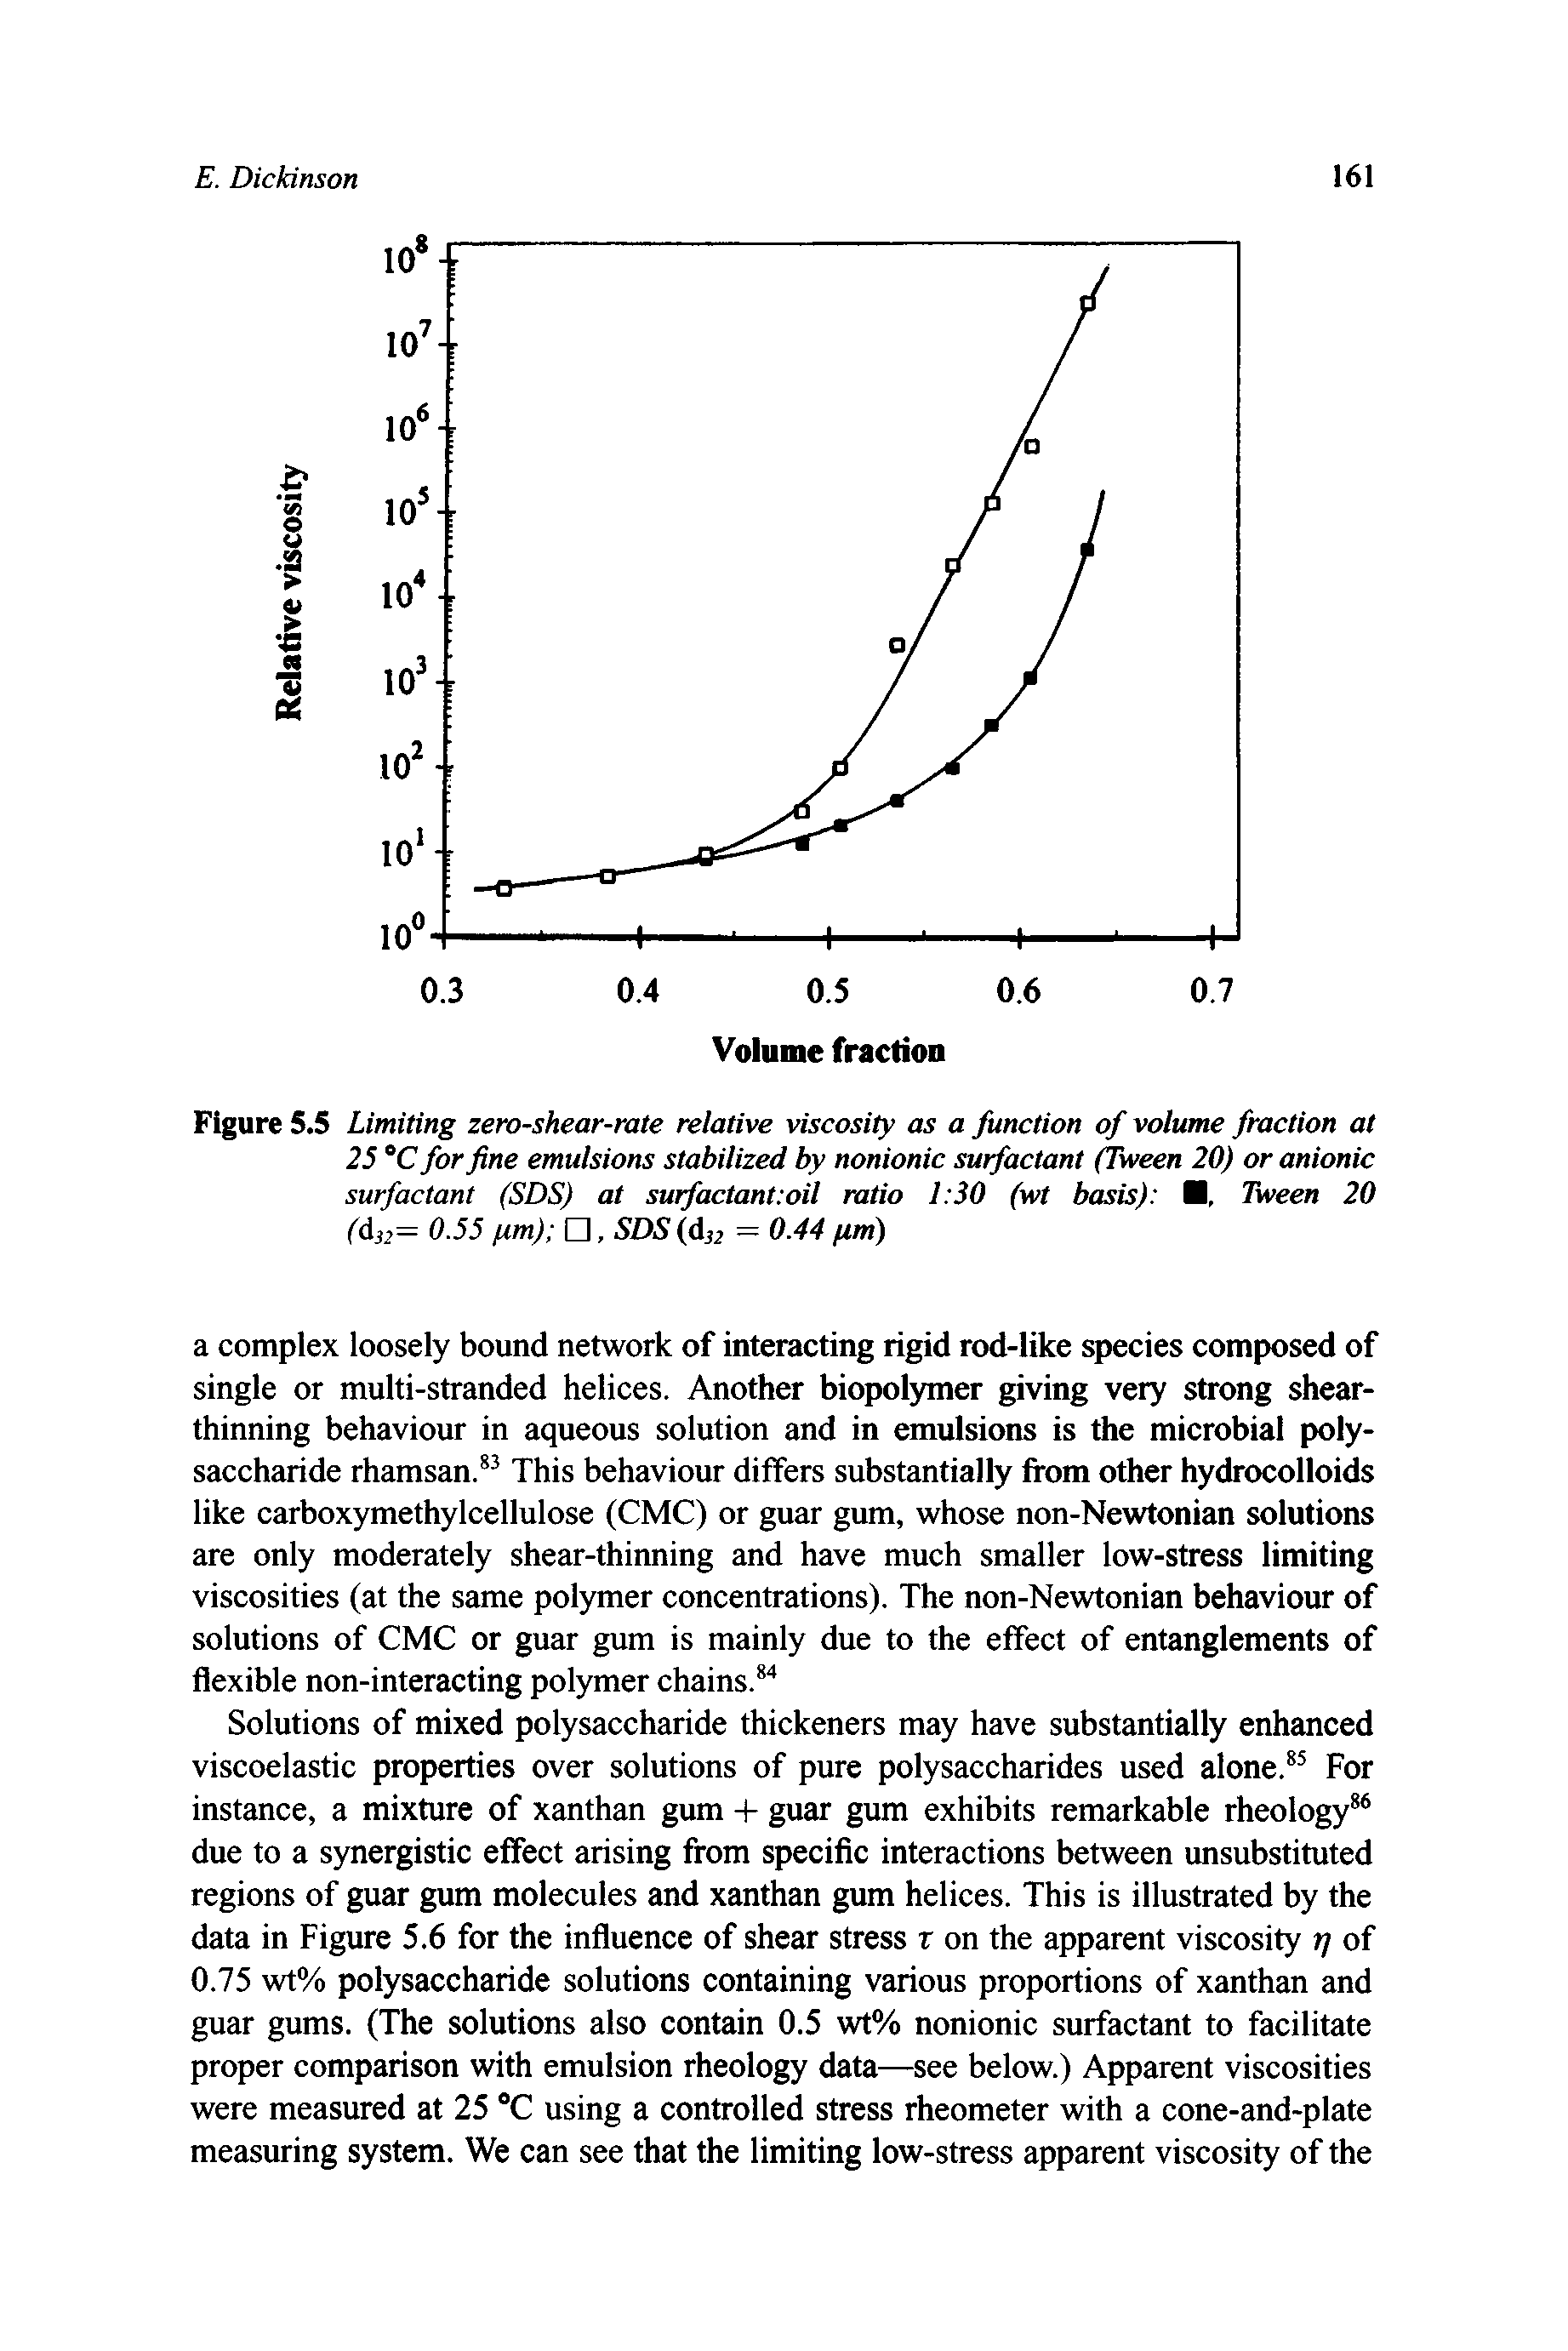 Figure 5.5 Limiting zero-shear-rate relative viscosity as a function of volume fraction at 25 C for fine emulsions stabilized by nonionic surfactant (Tween 20) or anionic surfactant (SDS) at surfactant oil ratio 1 30 (wt basis) , Tween 20 (d 2= 0.55 ftm) , SDS (dj2 = 0.44 ftm)...